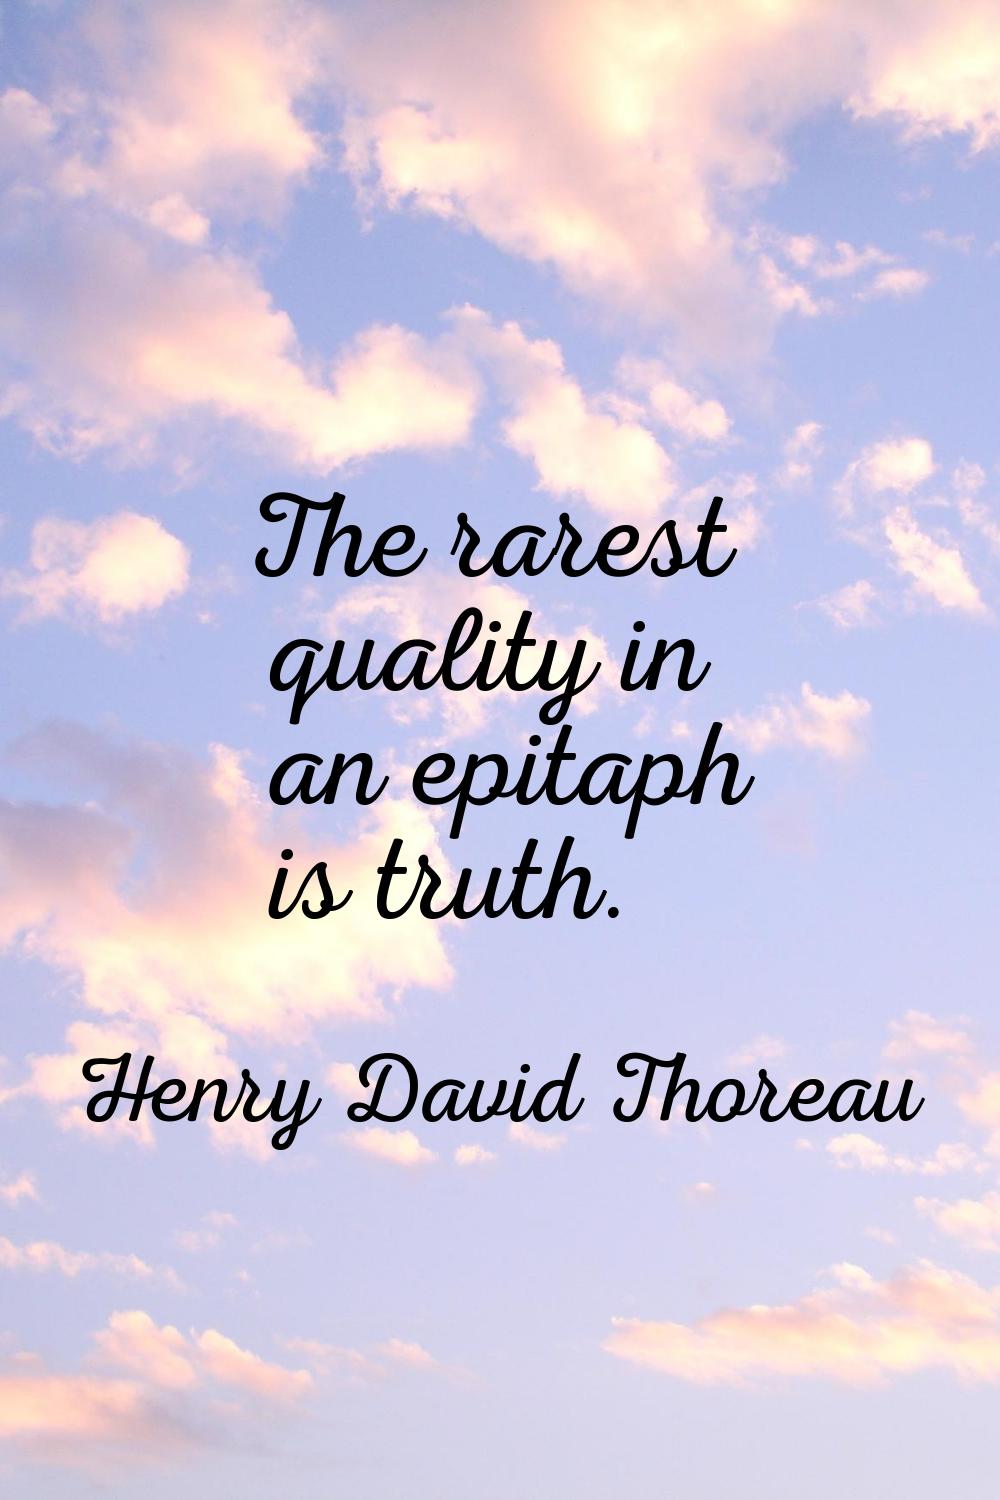 The rarest quality in an epitaph is truth.